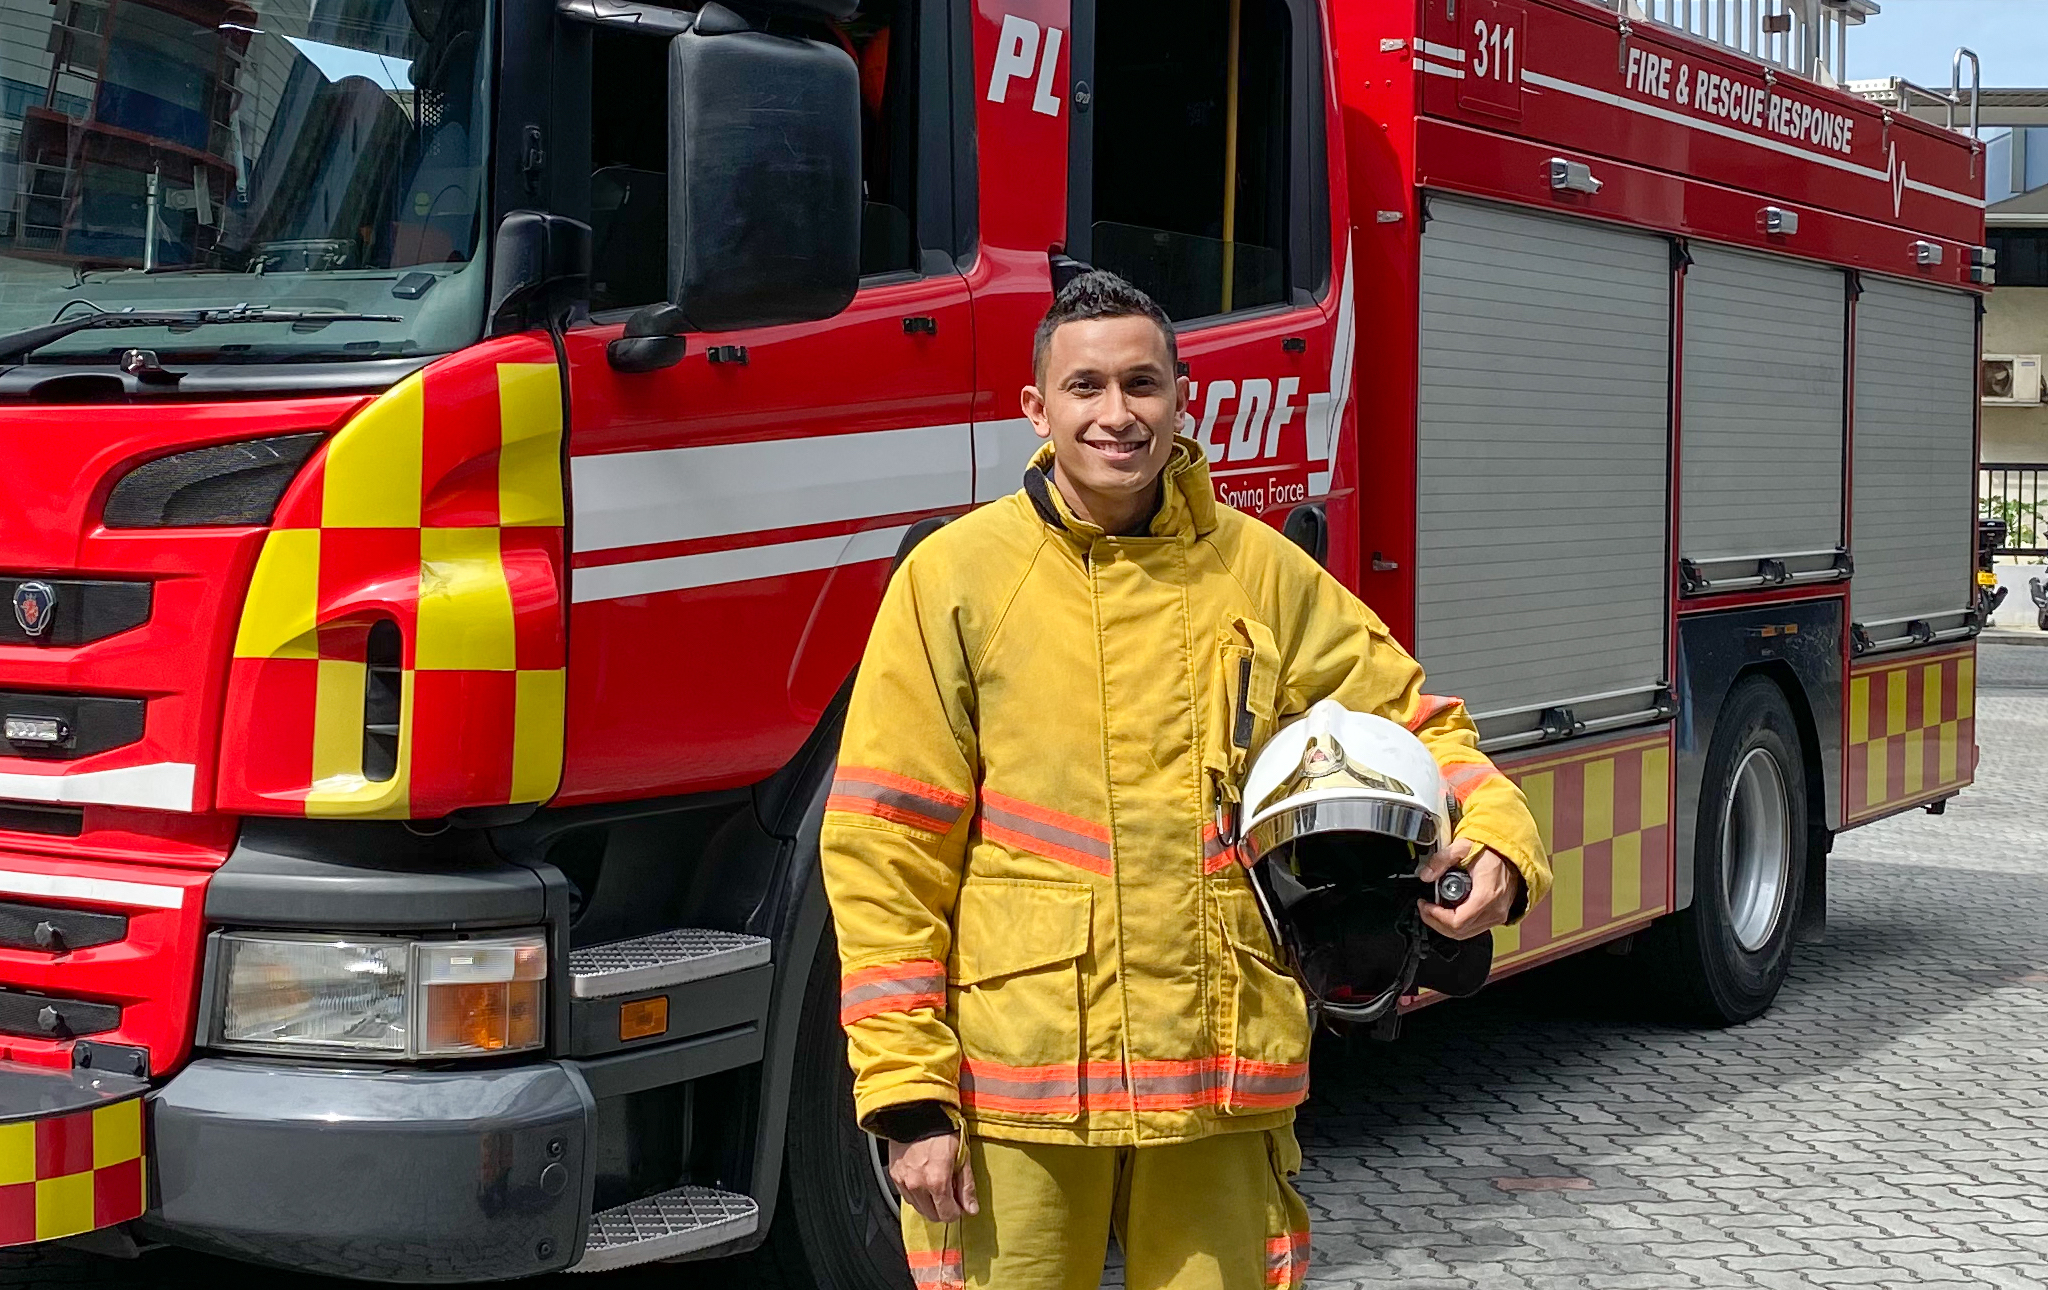 Lieutenant (LTA) Muhammad Bukhary Bin Abu Bakar, father of two and a Rota Commander at Yishun Fire Station, has been a member of The Lifesaving Force for over 12 years